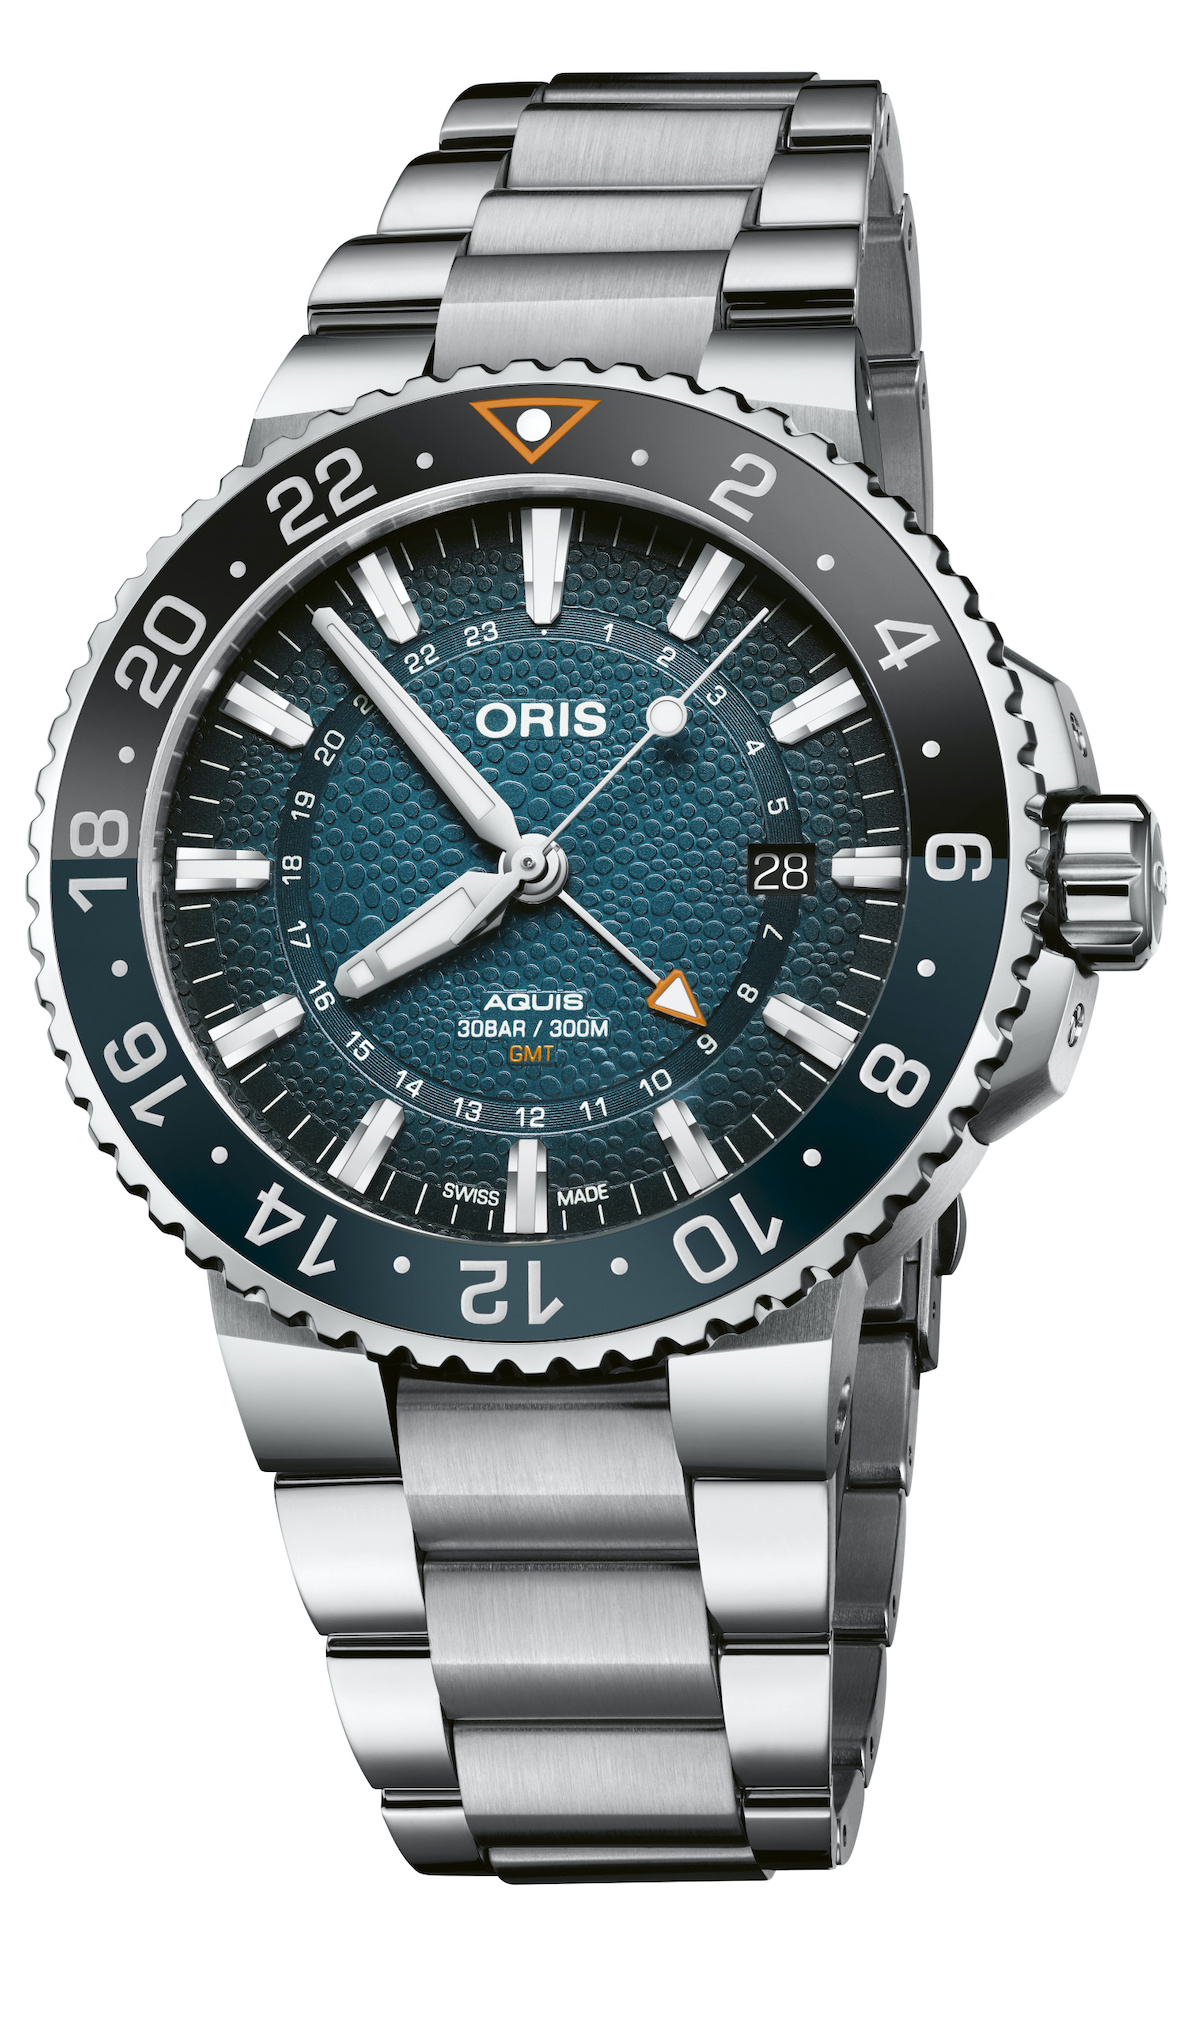  Oris Whale Shark Limited Edition watch 